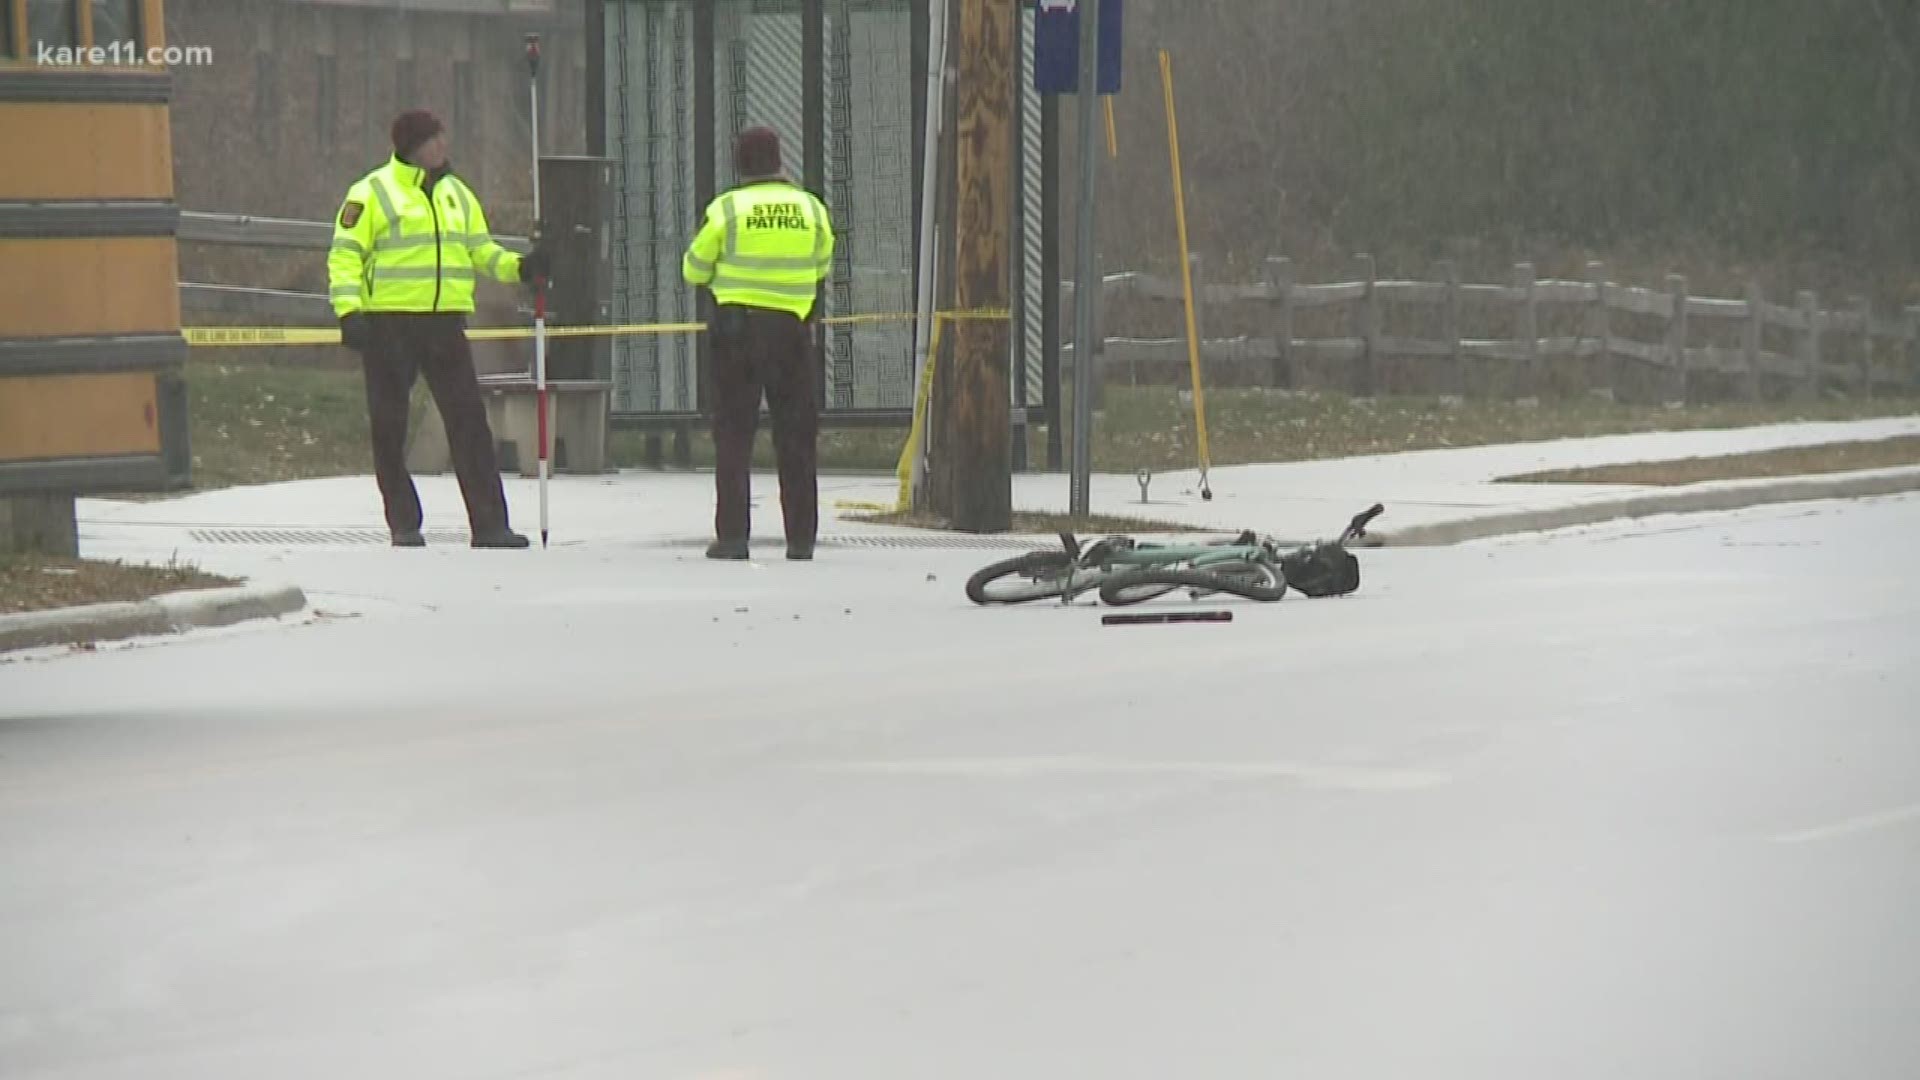 Police say the adult bicyclist died on the scene from his injuries.